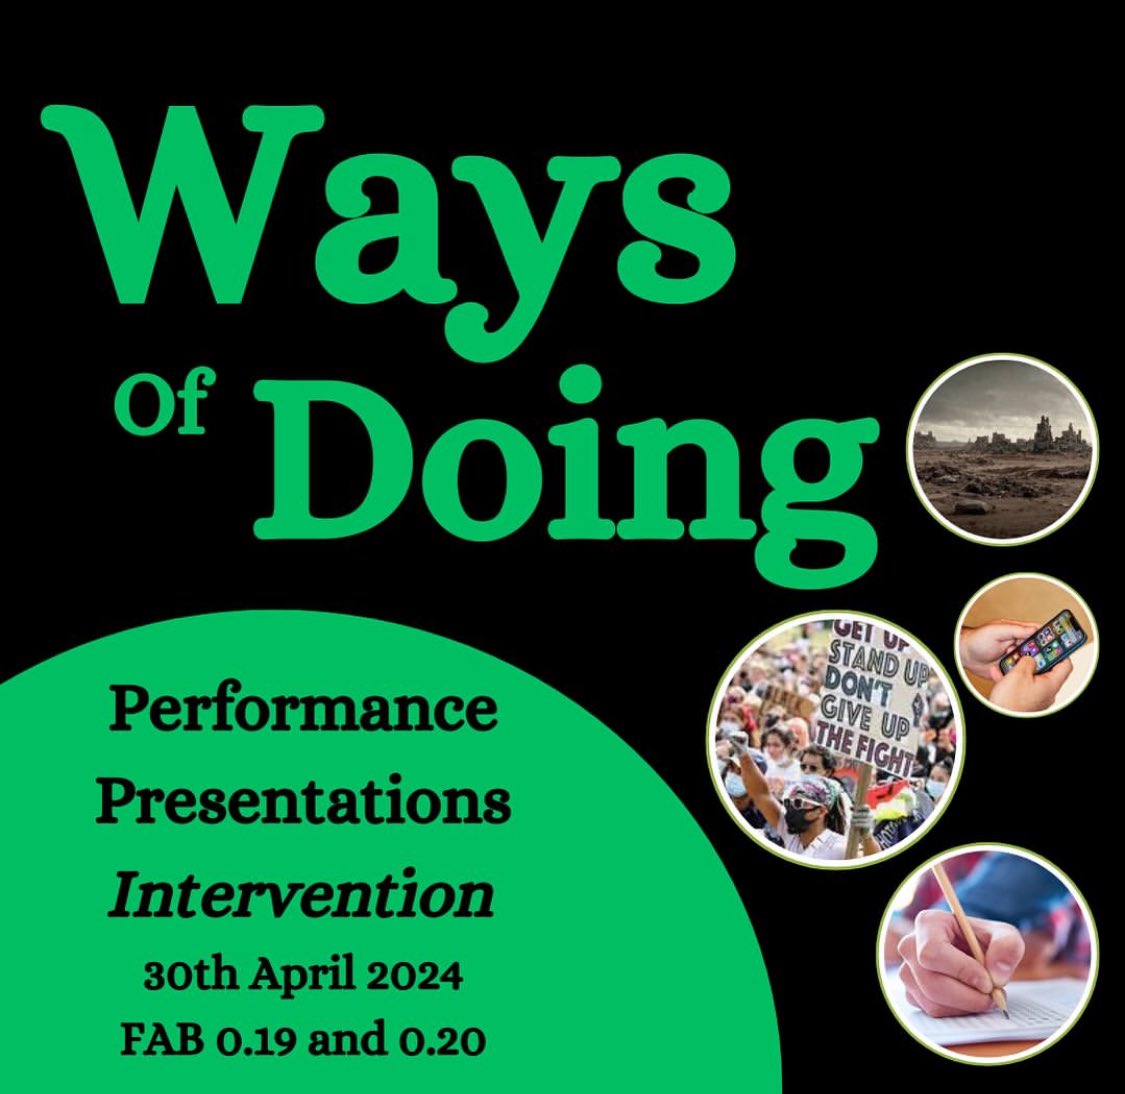 Tomorrow our second years will be showcasing their final performances as part of their core module, Ways of Doing. They’ve developed pieces which act as an intervention into a world issue they feel strongly about. 10am-4pm tomorrow, good luck and congratulations second years!